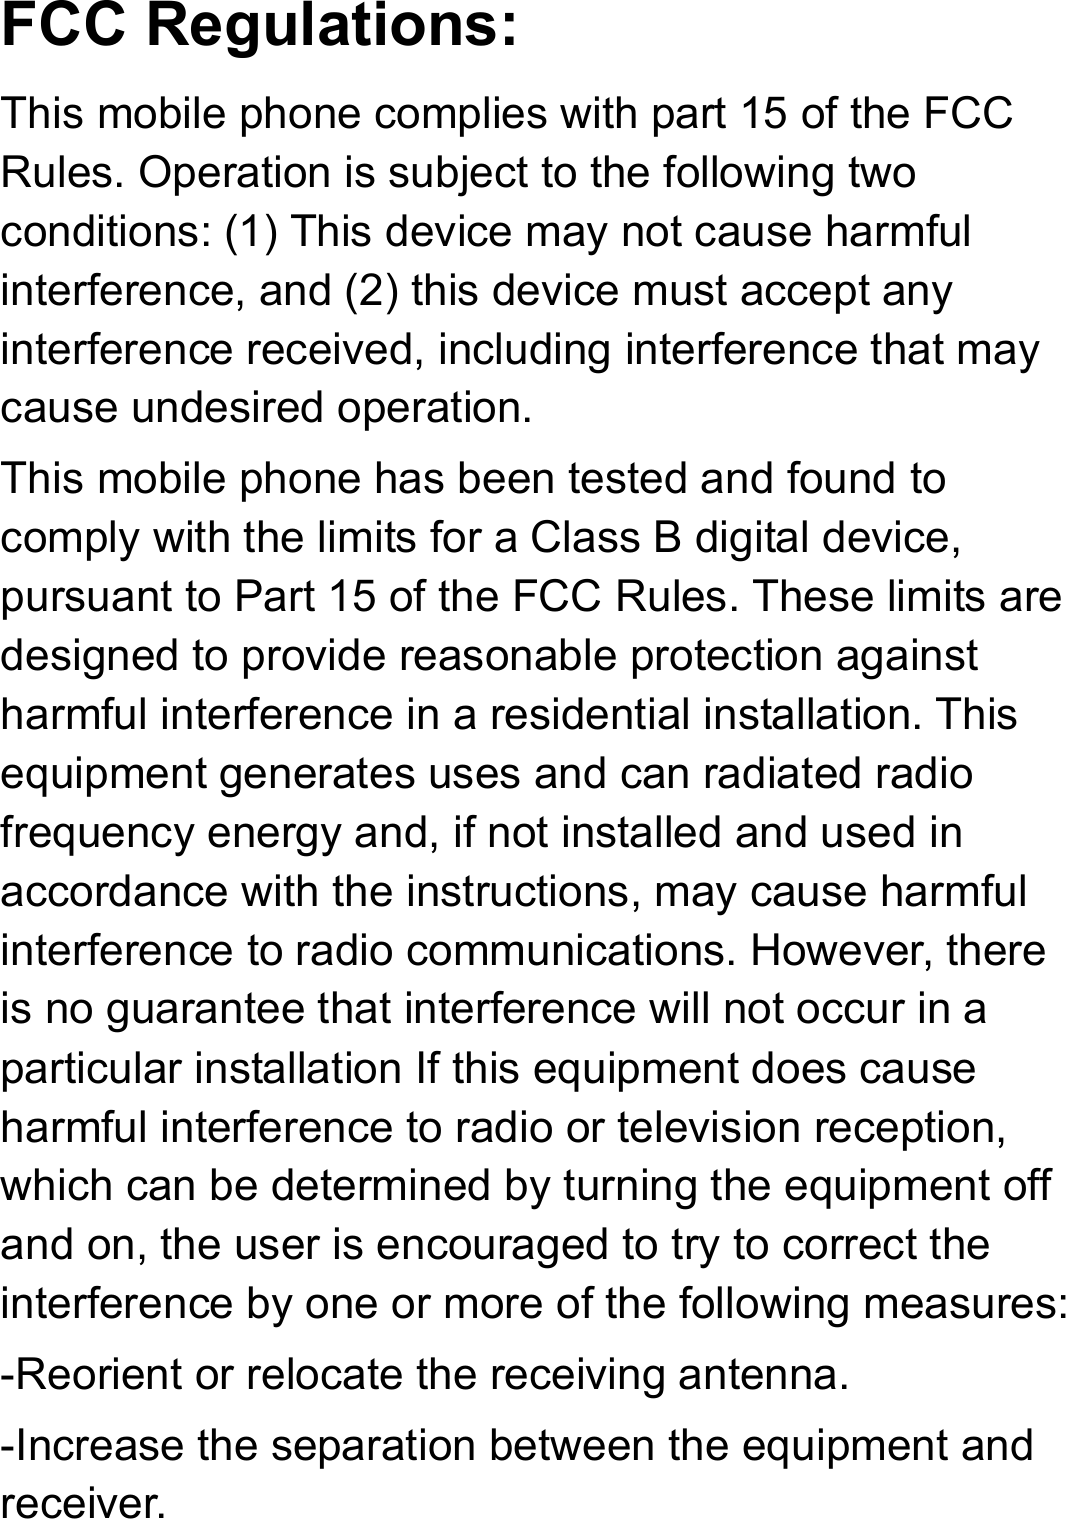 FCC Regulations: This mobile phone complies with part 15 of the FCC Rules. Operation is subject to the following two conditions: (1) This device may not cause harmful interference, and (2) this device must accept any interference received, including interference that may cause undesired operation. This mobile phone has been tested and found to comply with the limits for a Class B digital device, pursuant to Part 15 of the FCC Rules. These limits are designed to provide reasonable protection against harmful interference in a residential installation. This equipment generates uses and can radiated radio frequency energy and, if not installed and used in accordance with the instructions, may cause harmful interference to radio communications. However, there is no guarantee that interference will not occur in a particular installation If this equipment does cause harmful interference to radio or television reception, which can be determined by turning the equipment off and on, the user is encouraged to try to correct the interference by one or more of the following measures: -Reorient or relocate the receiving antenna. -Increase the separation between the equipment and receiver. 